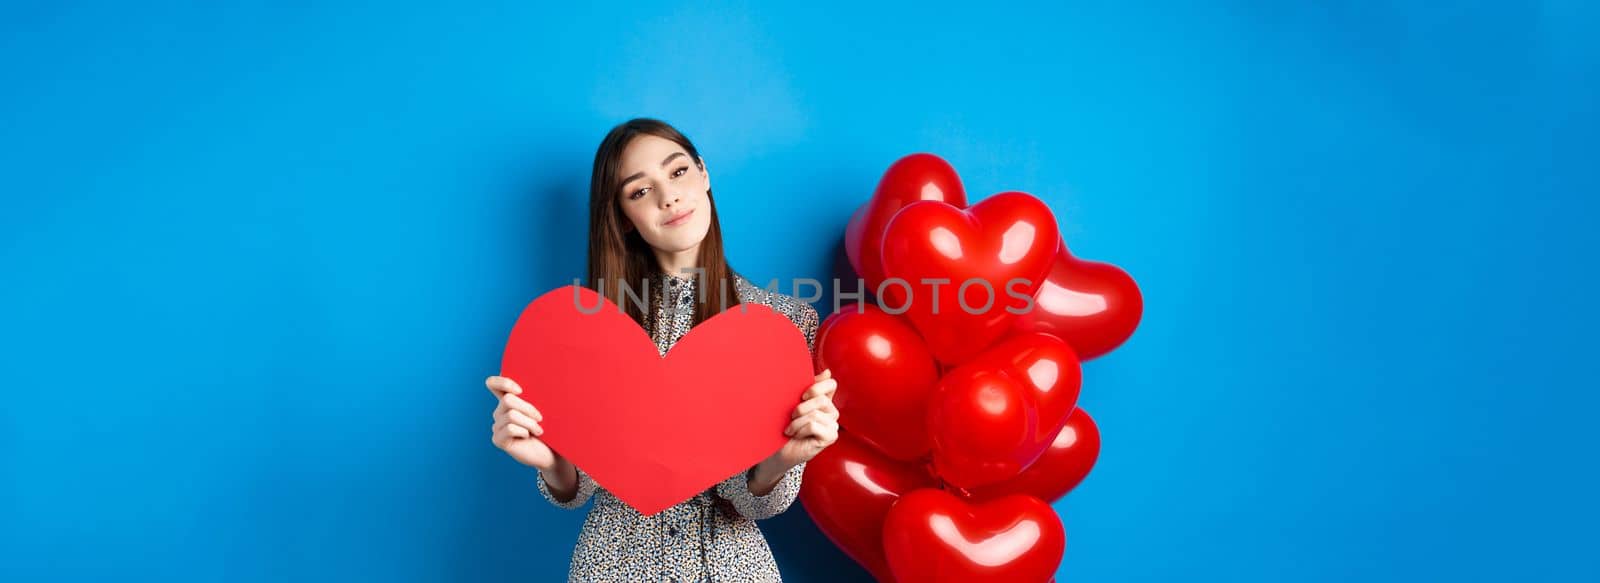 Valentines day. Romantic girl in dress showing big red heart cutout, dreaming of love, standing near holiday balloons on blue background.